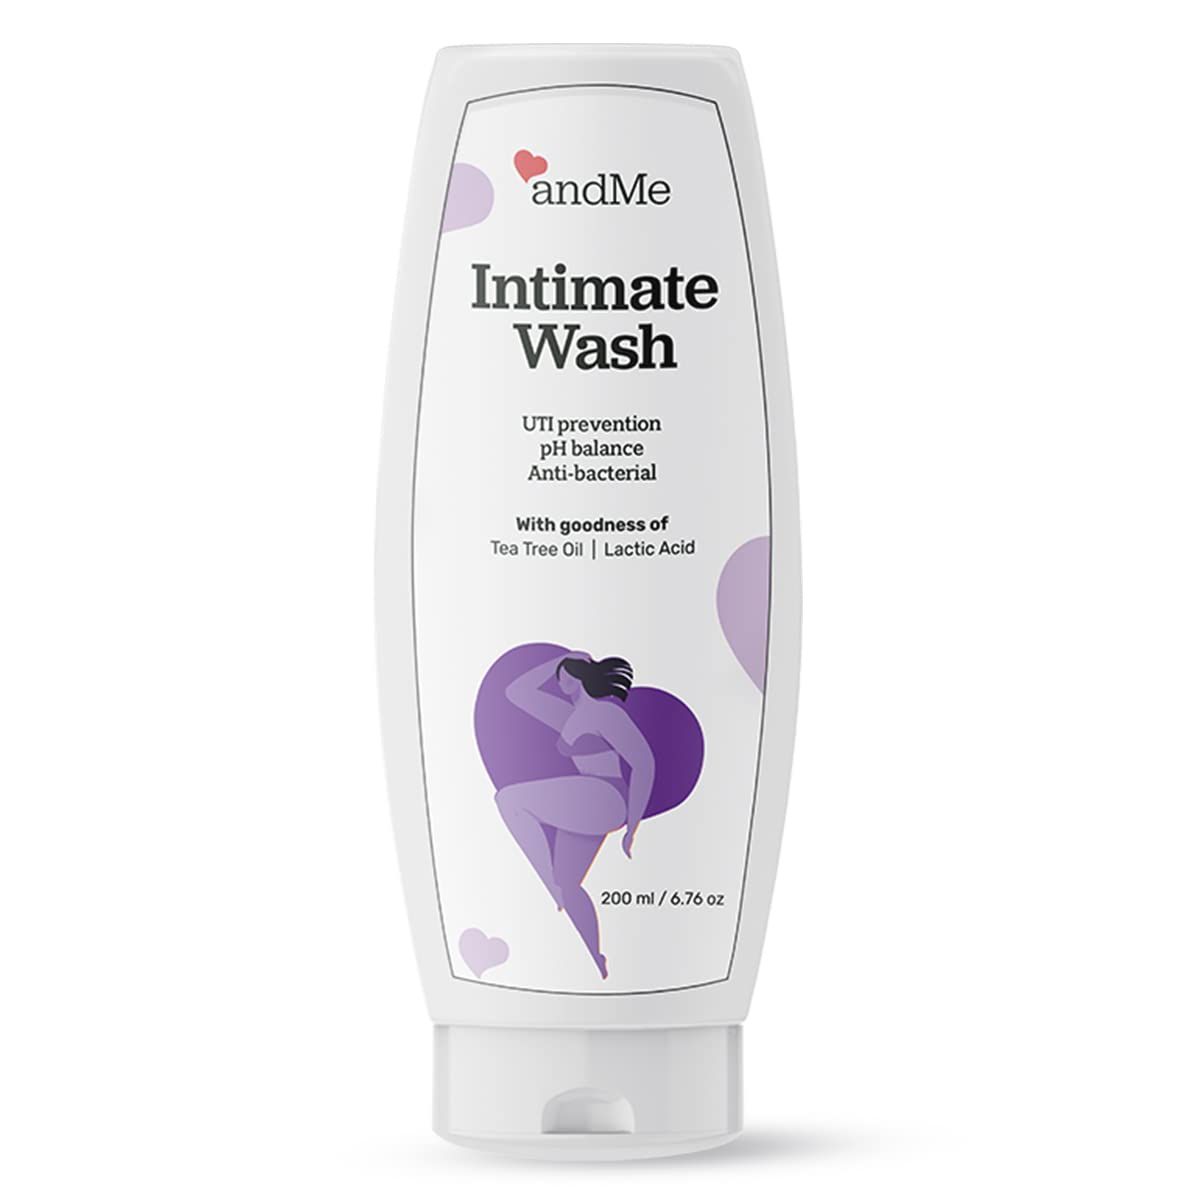 andMe Intimate Wash for Women | Intimate Hygiene Feminine Wash to Reduce Flaky Skin, Improve Hydration, Increase softness with balancing pH - 